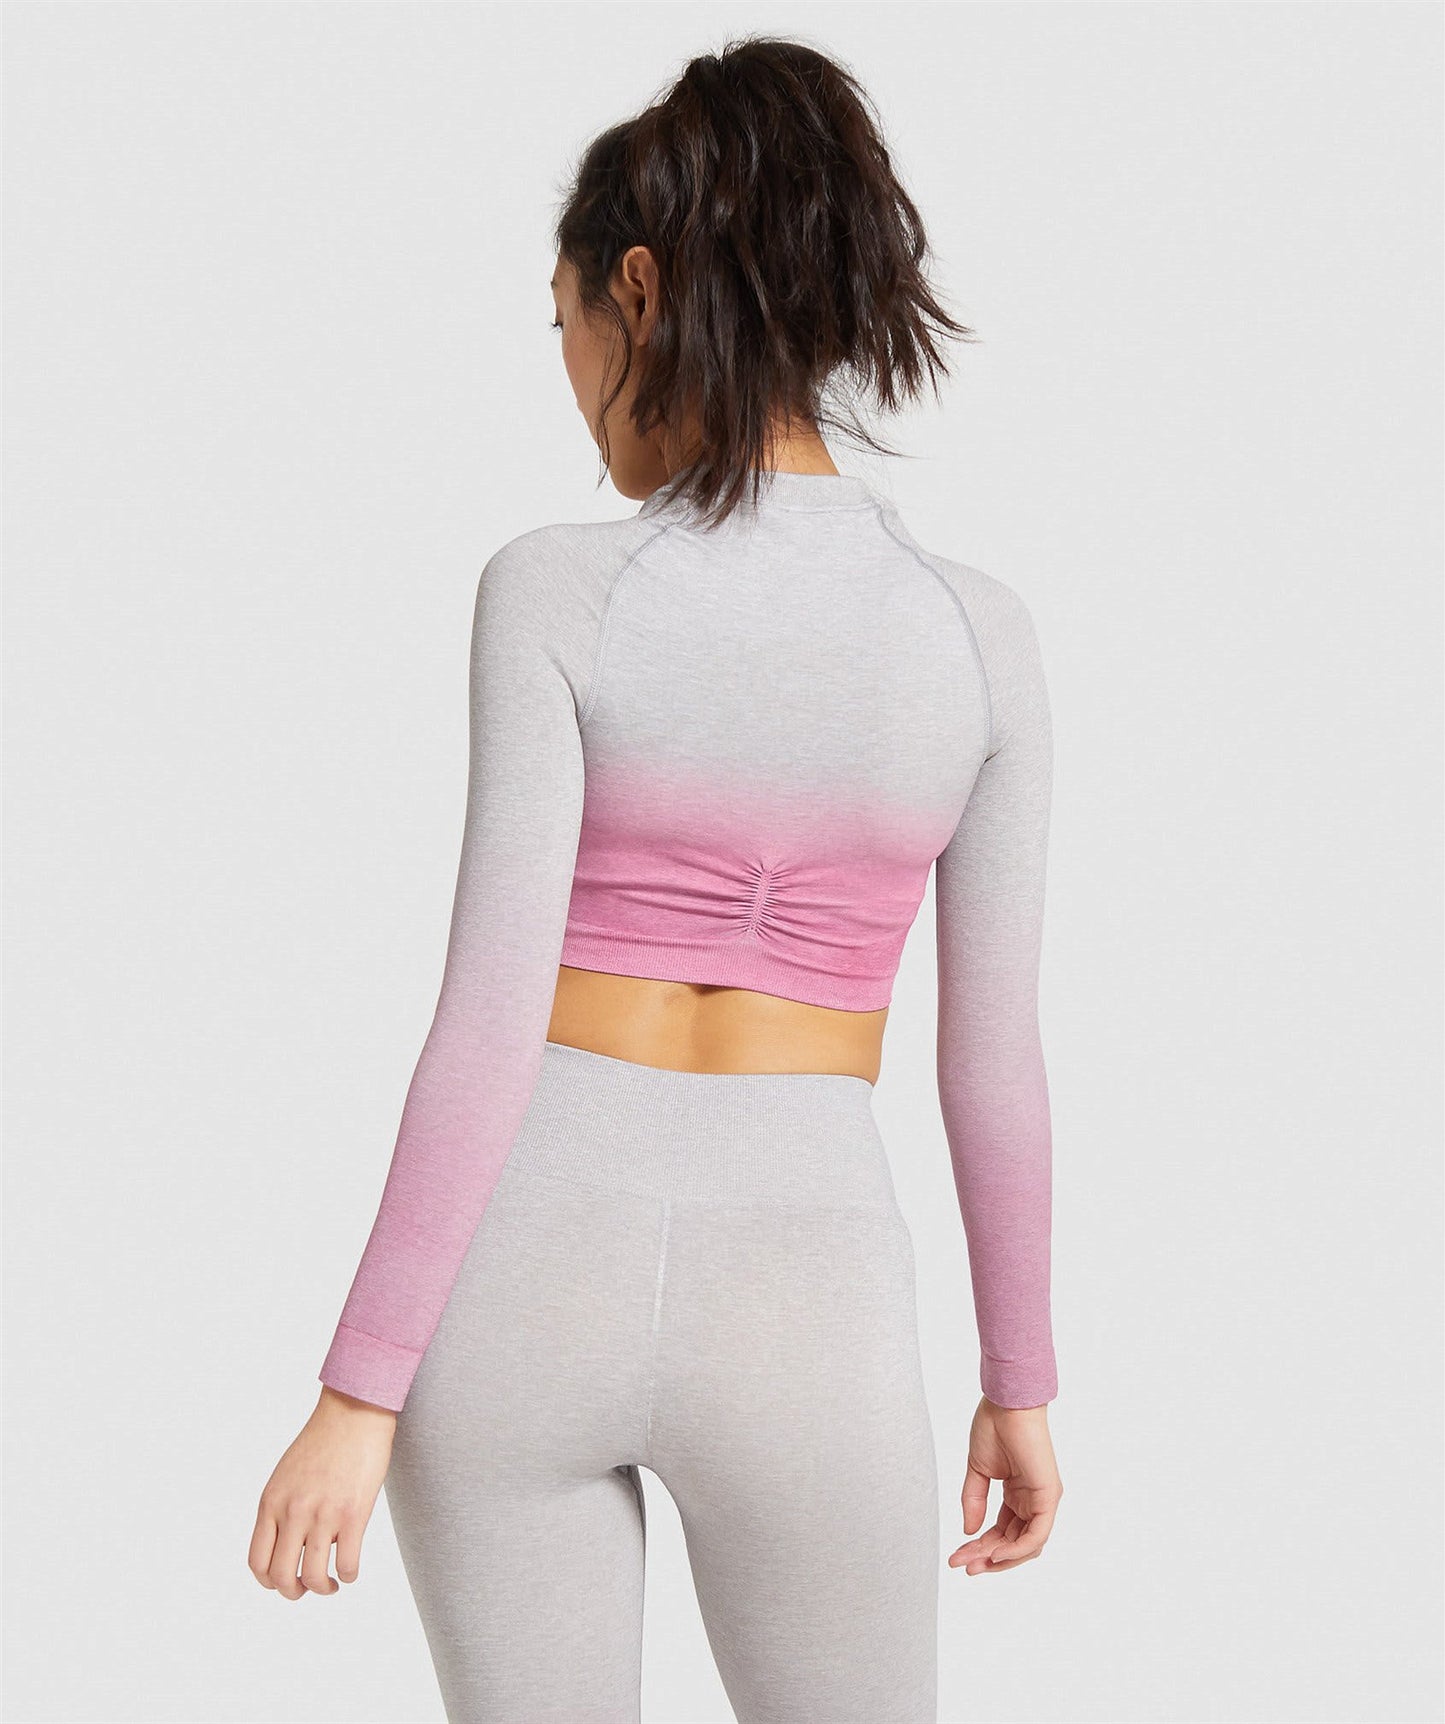 Bodybuilding Workout Tight Yoga Suit-Enhance Your Fitness Journey